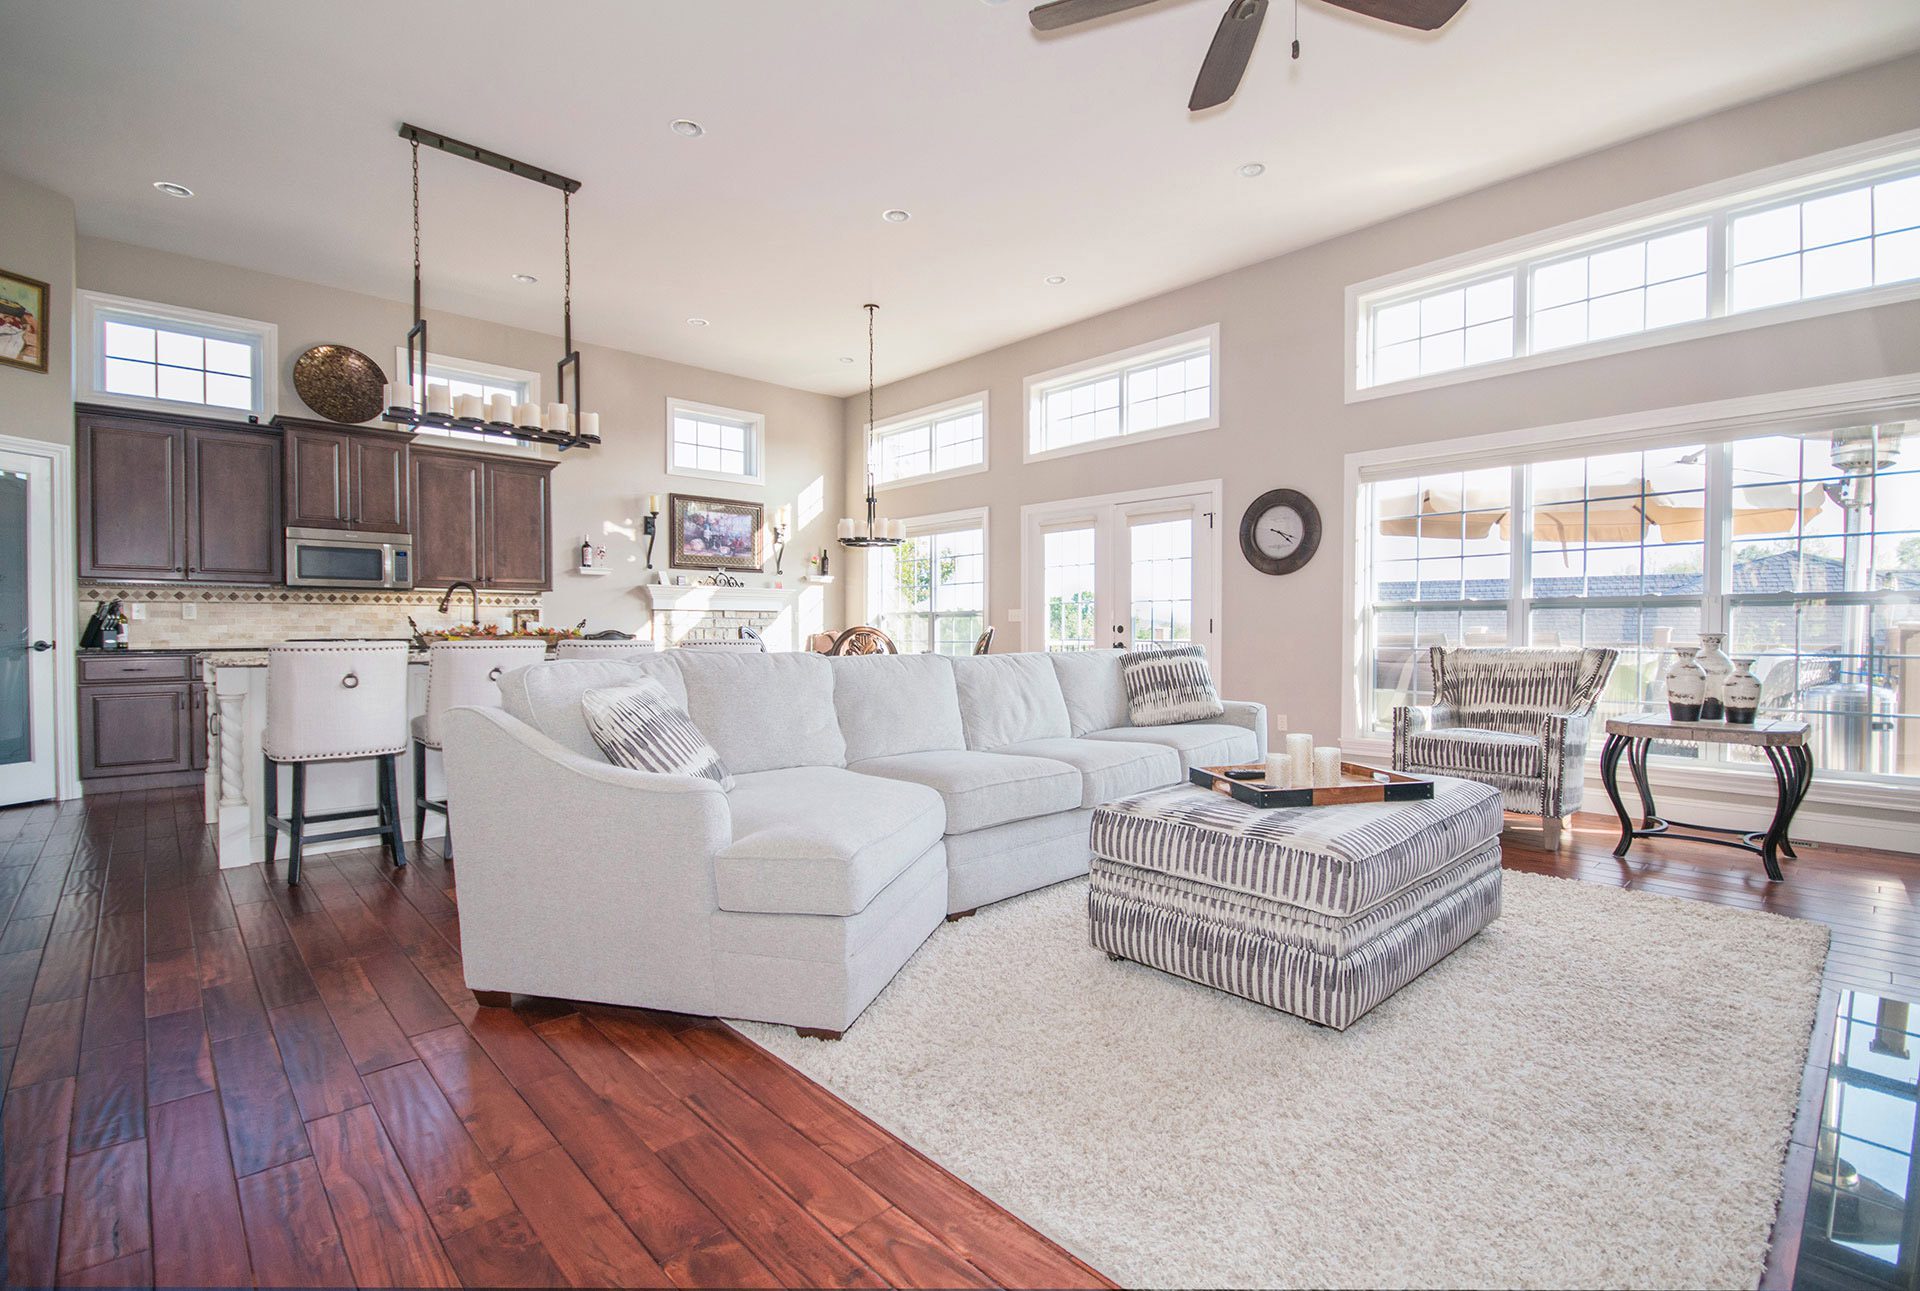 A cozy living room with hardwood floors and a ceiling fan.